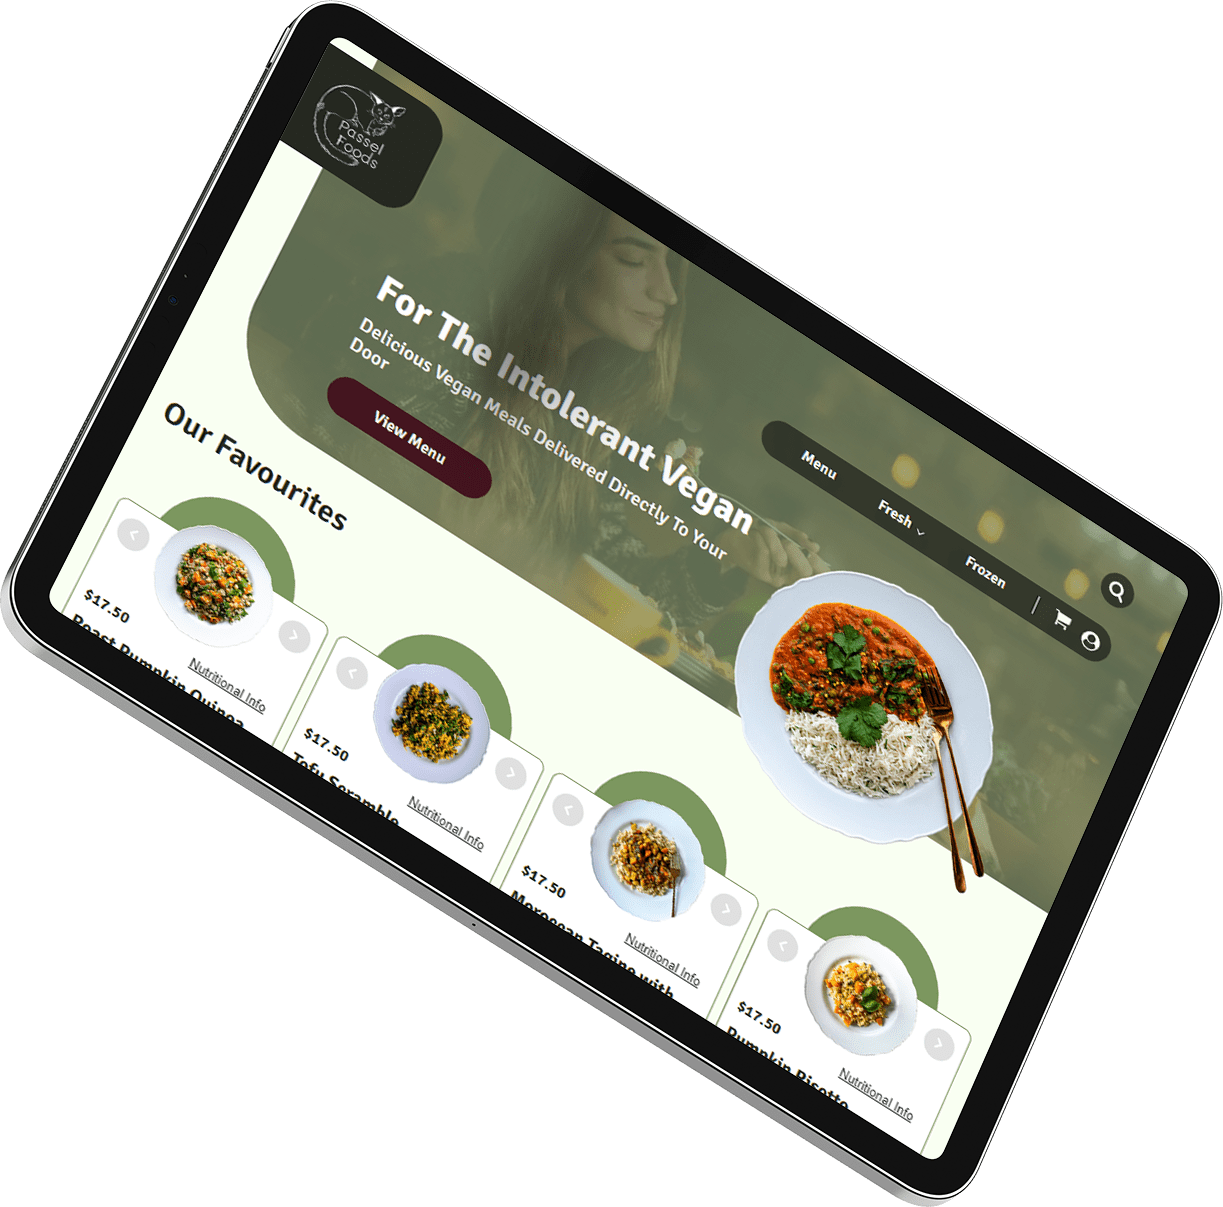 ipad from a perspective view showing Passel Foods Website